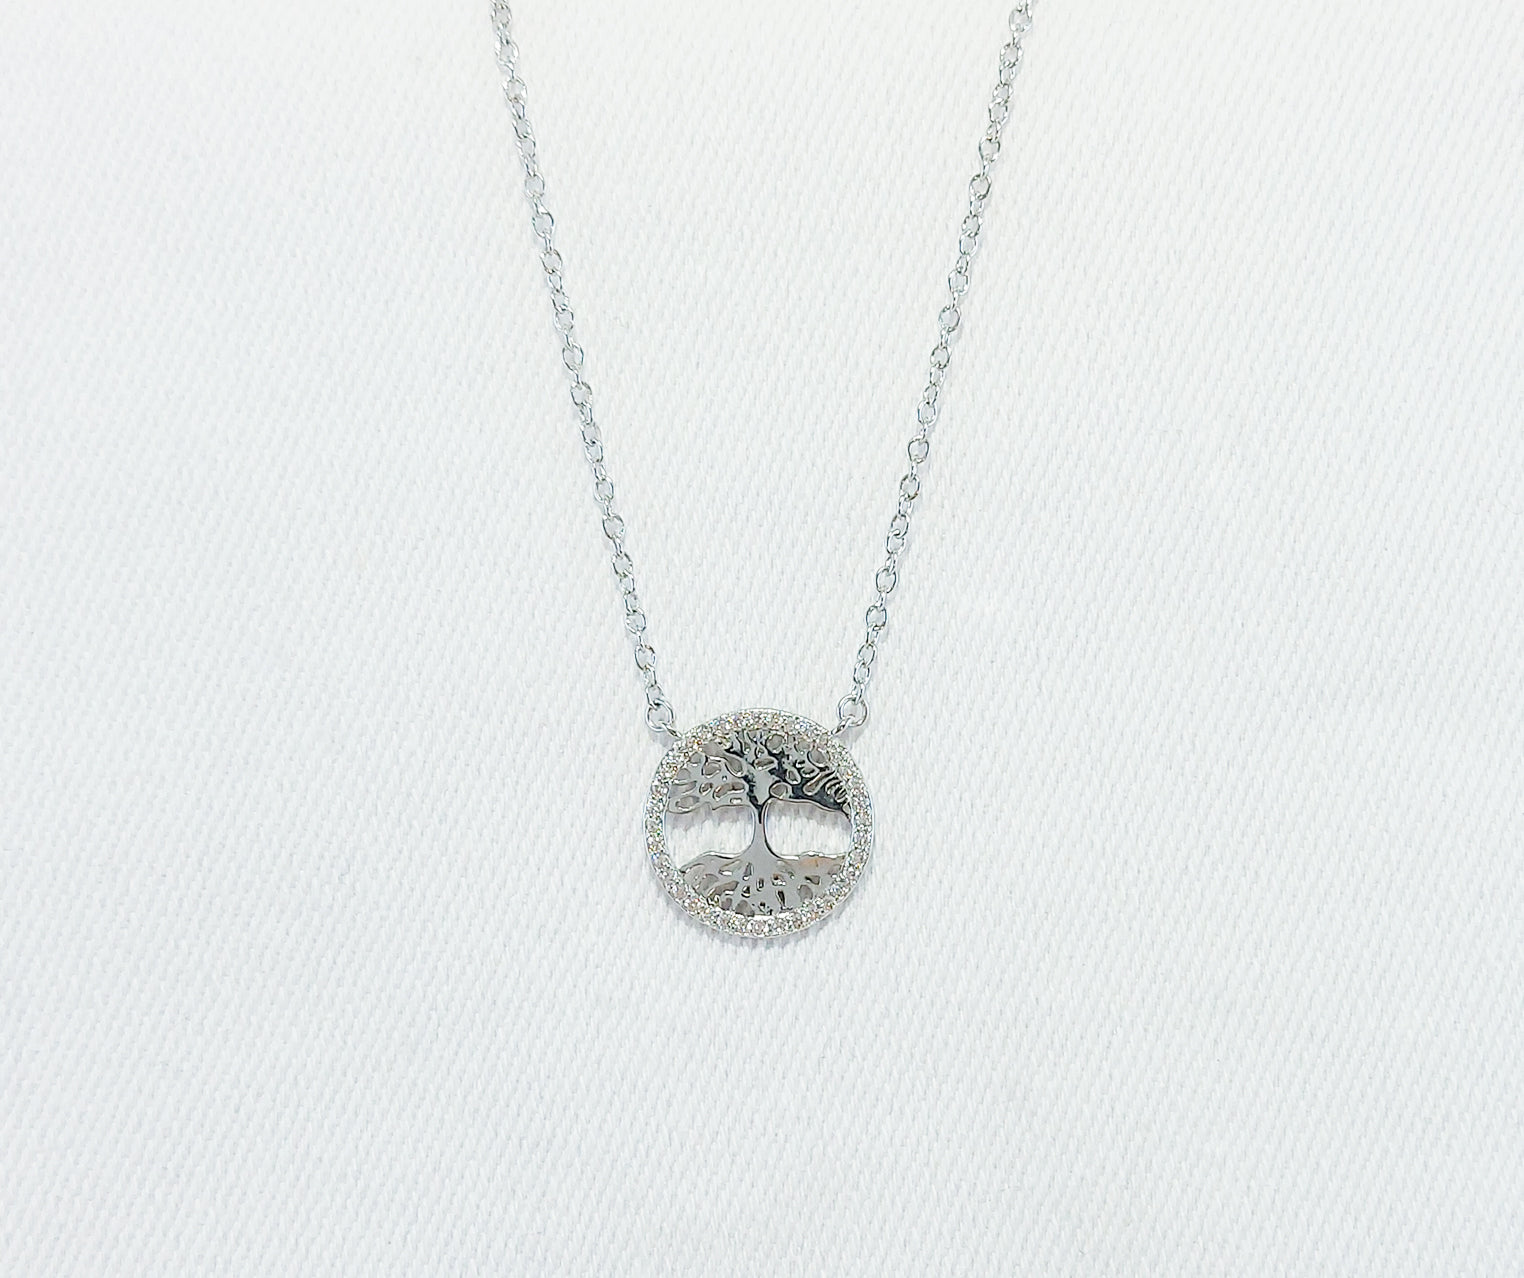 Sterling Silver Tree of Life Necklace with Cubic Zirconia Stones